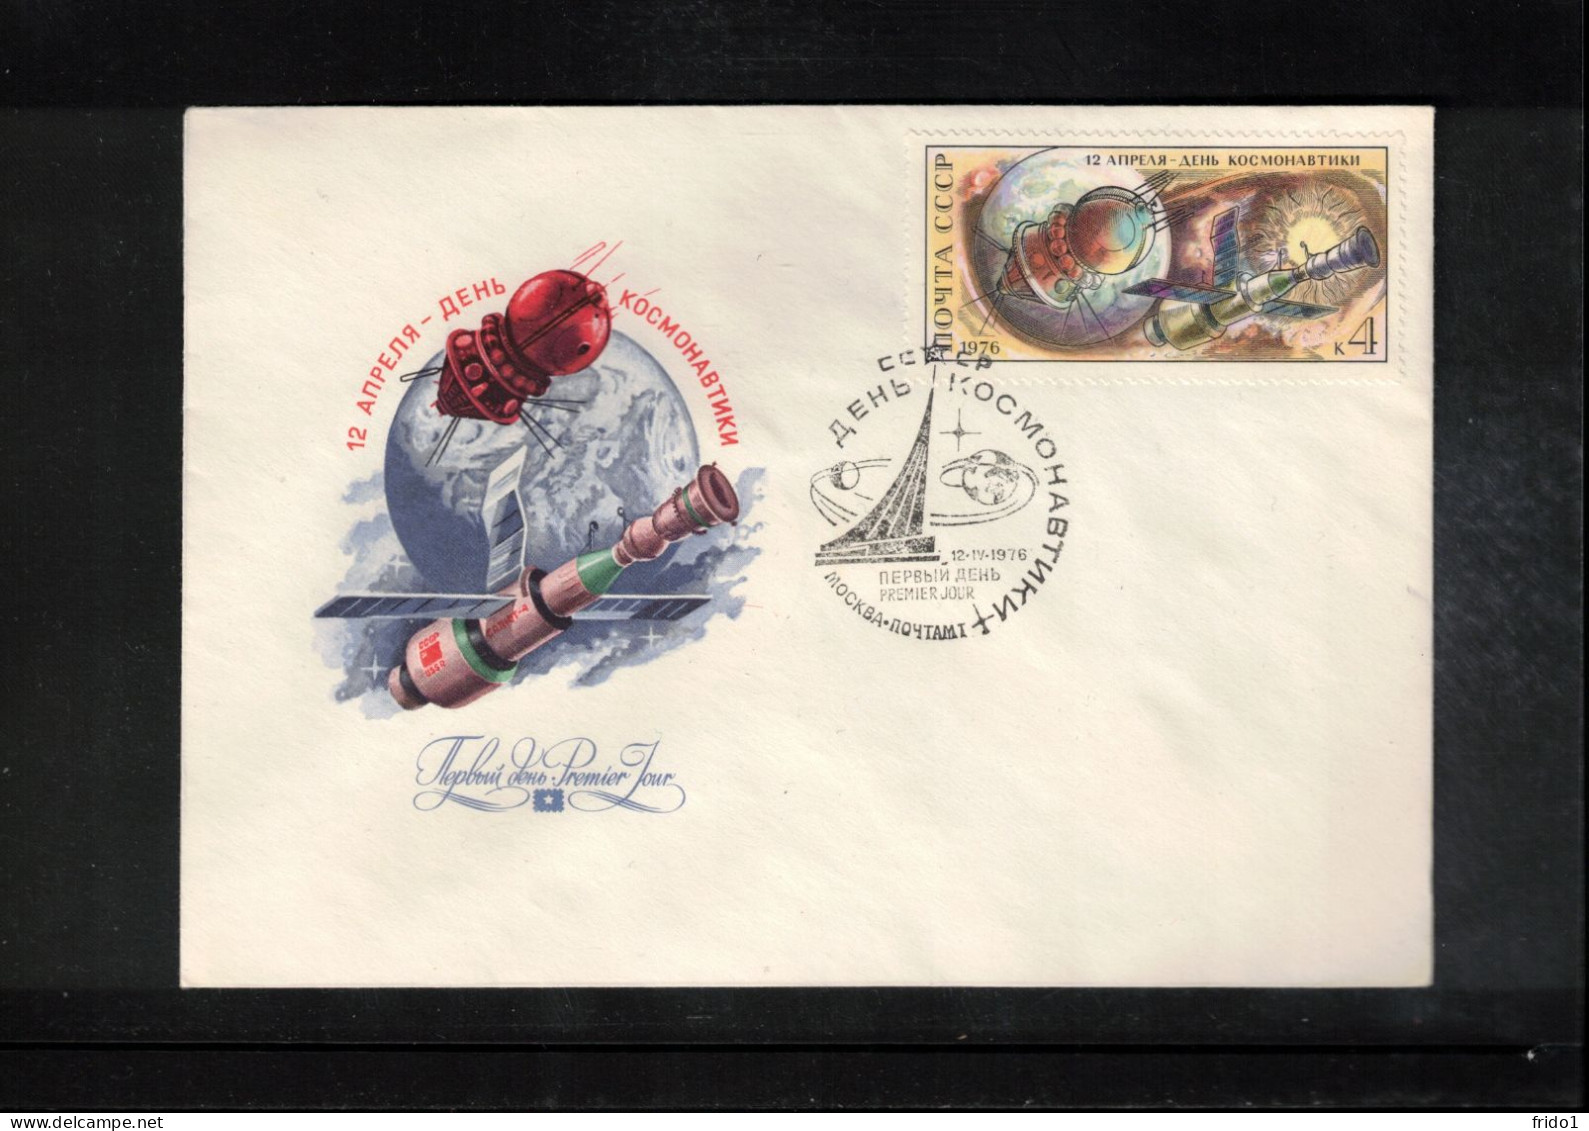 Russia USSR 1976 Space / Weltraum Cosmonaut's Day Interesting Cover - Russia & USSR